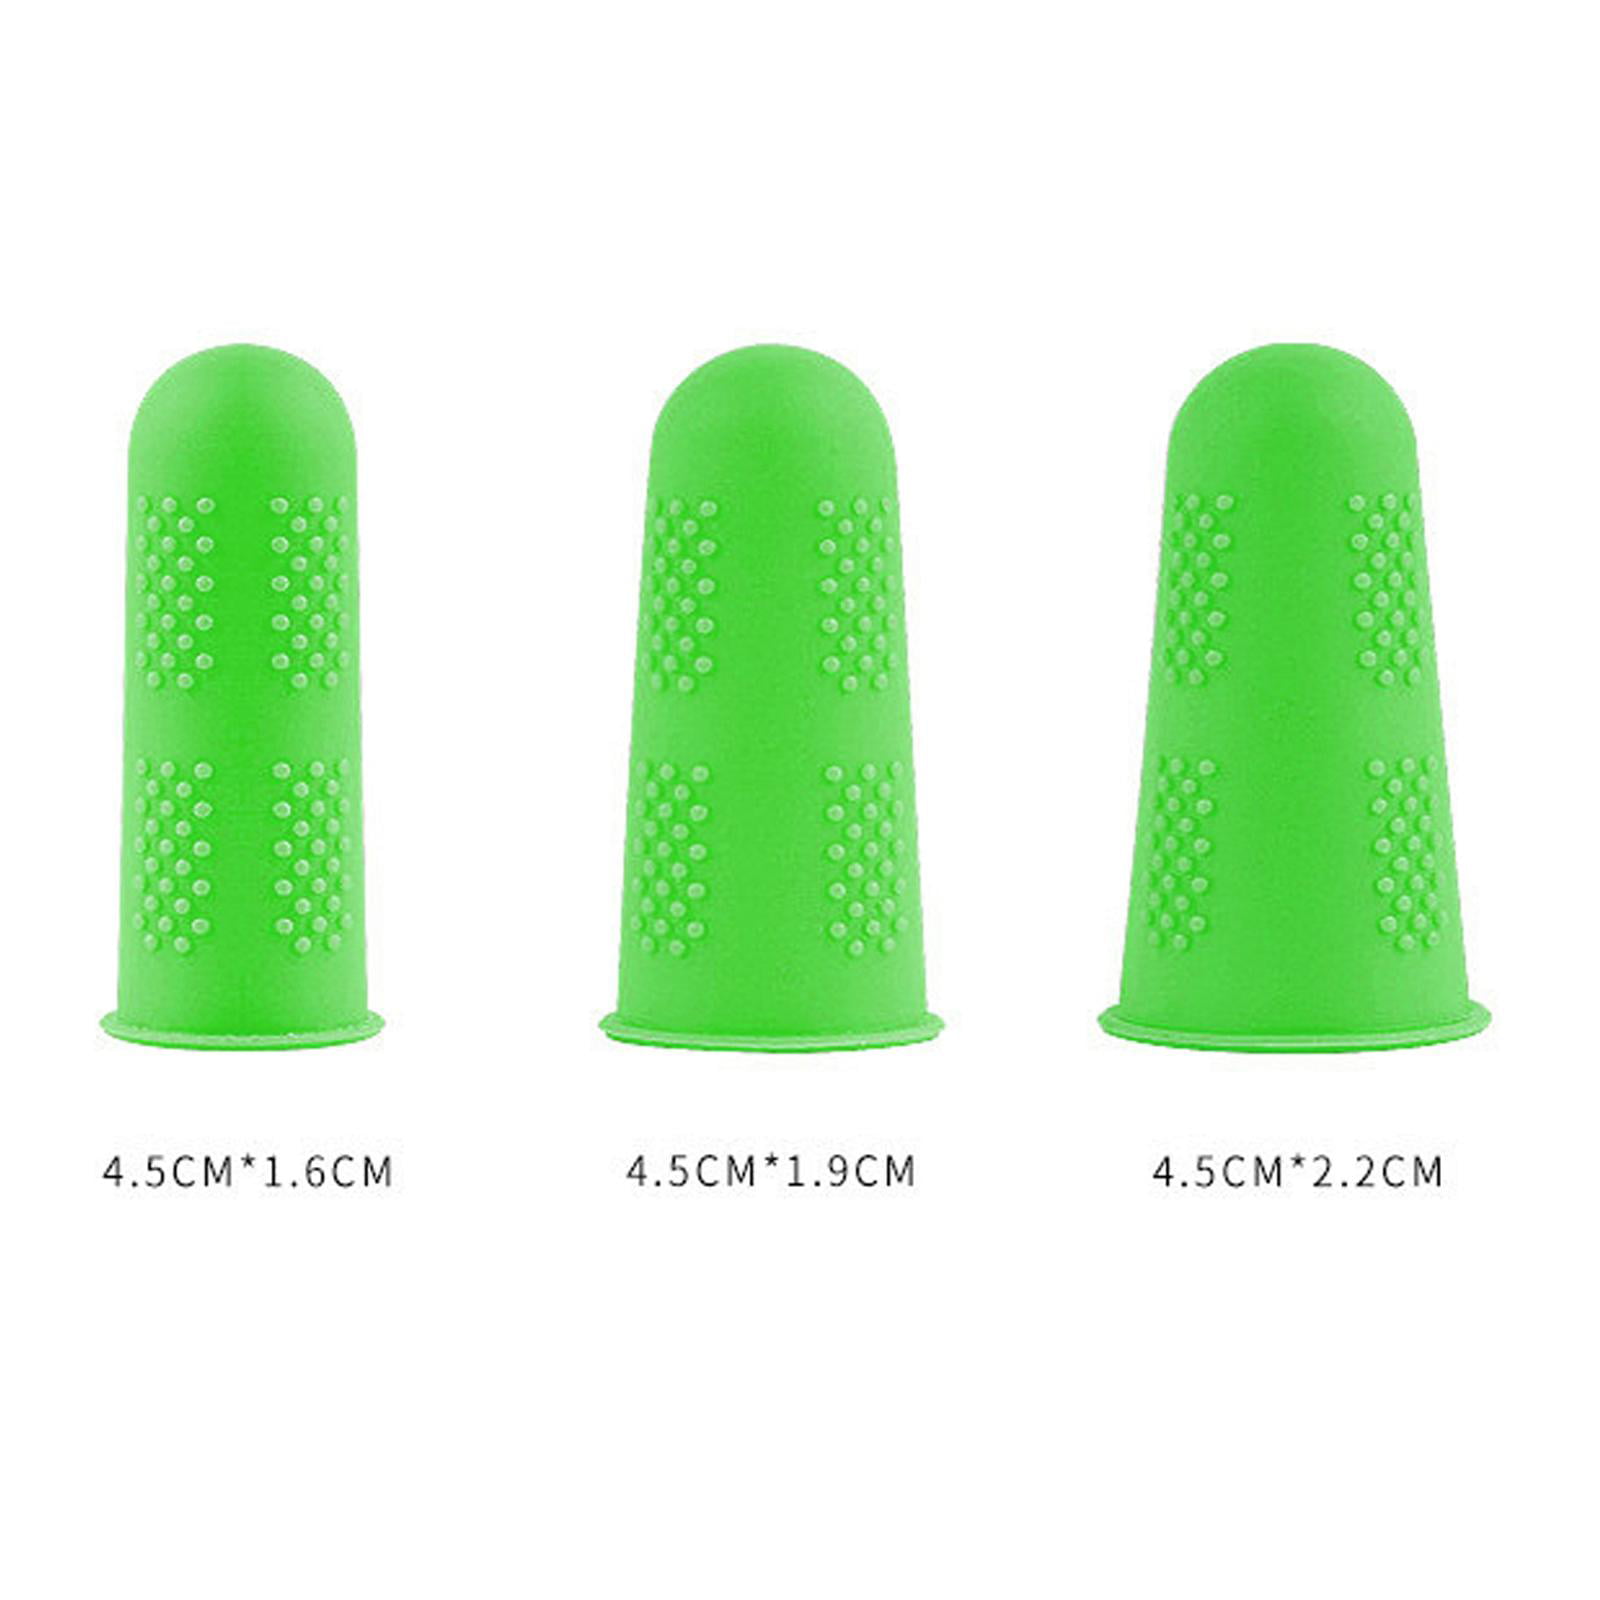 RUBBER THIMBLE Finger Protector GREEN Small 016mm COUNT PAPER Thimblette  BySMCO